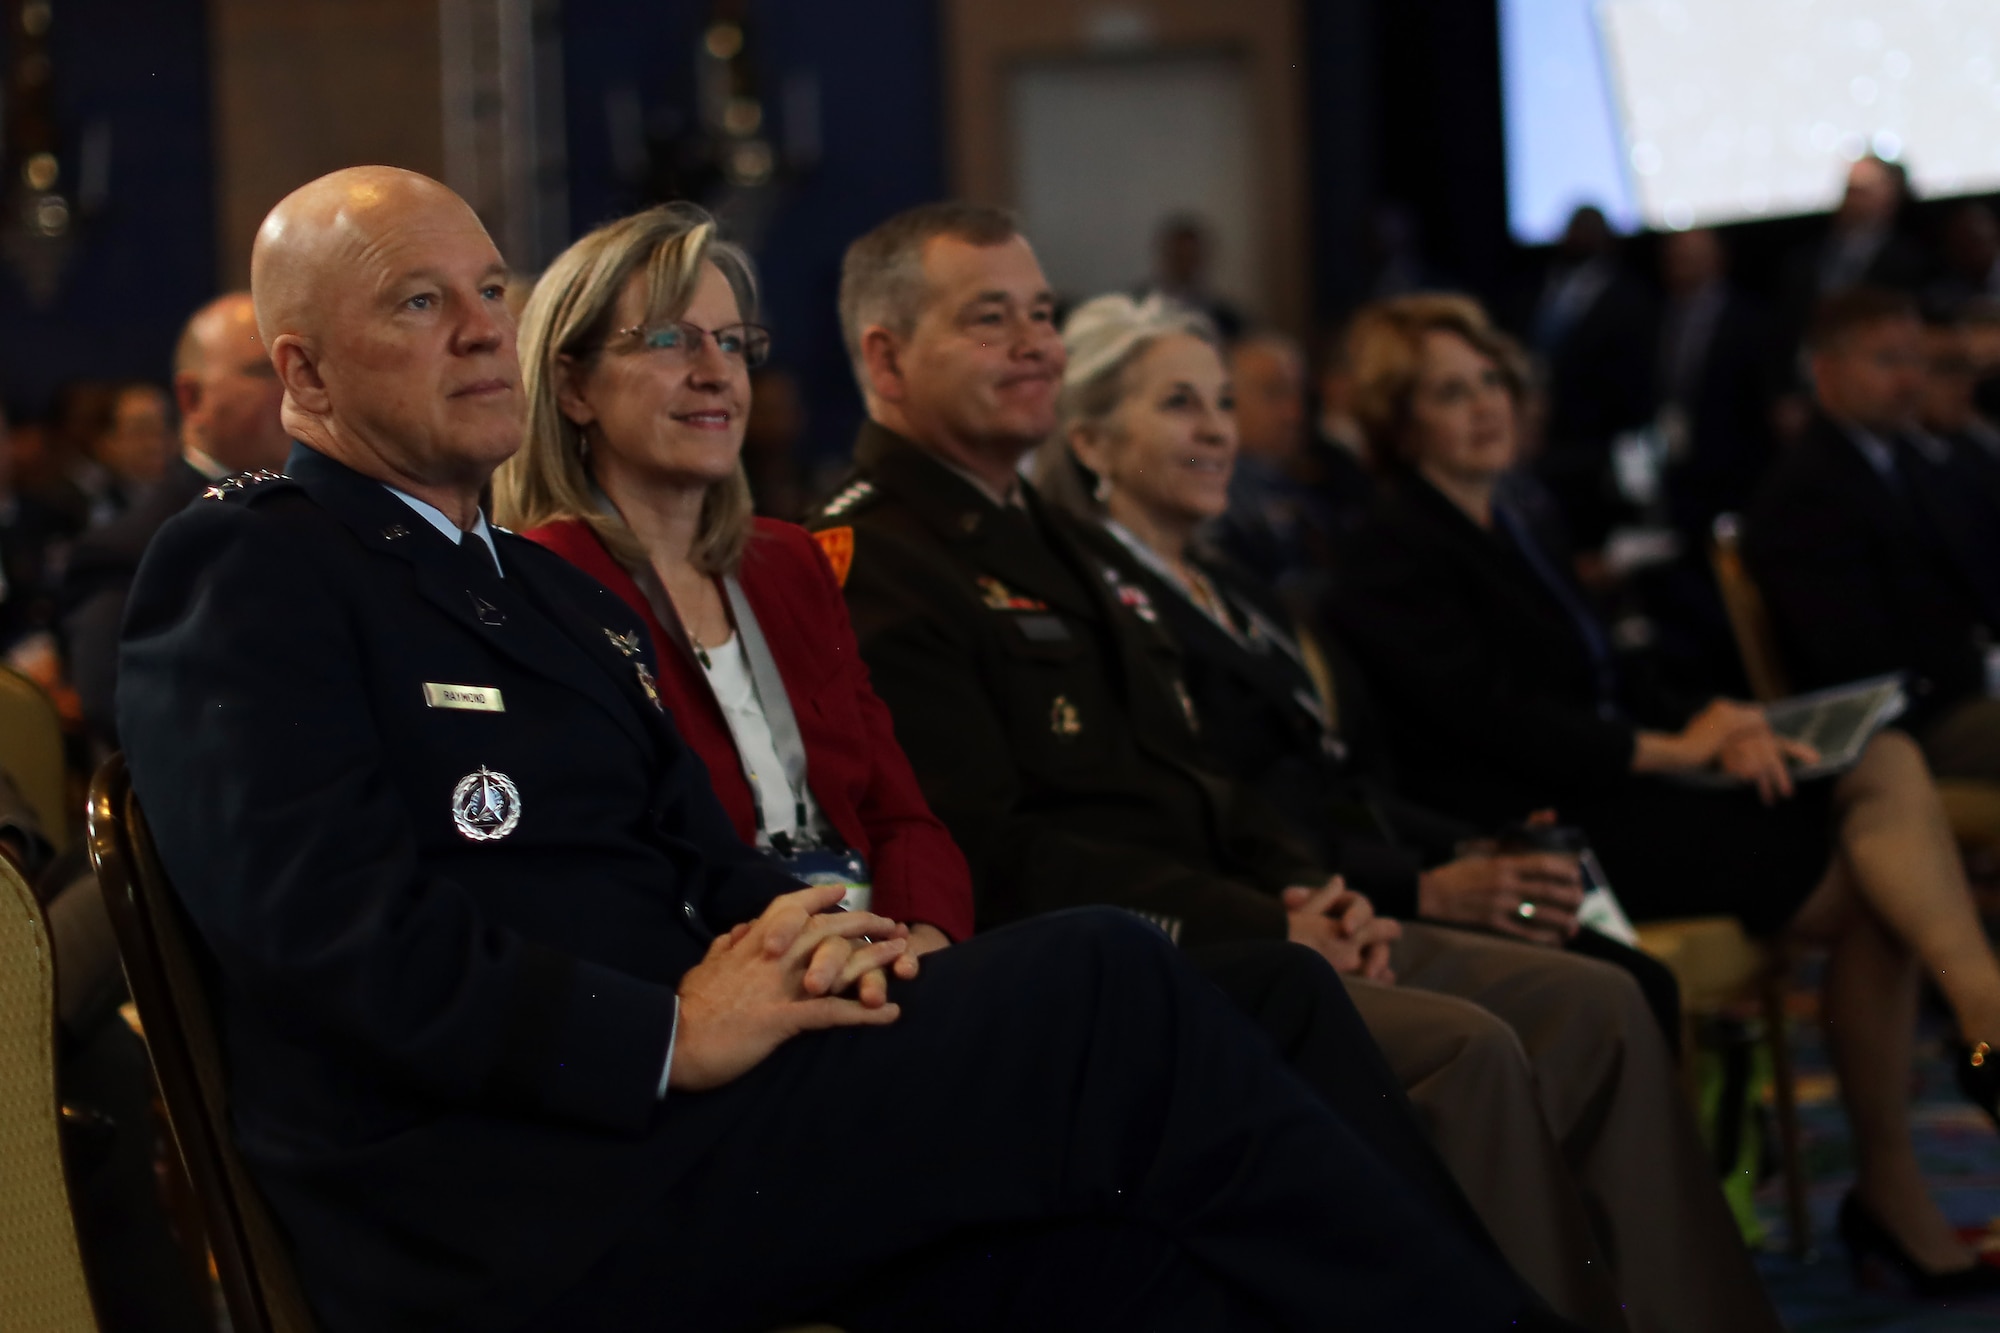 Chief of Space Operations Gen. John W. “Jay” Raymond and his wife Mollie, listen as Secretary of the Air Force Frank Kendall delivers the keynote address at the Space Foundations 37th Space Symposium April 5, 2022 in Colorado Springs, CO. (Courtesy photo)